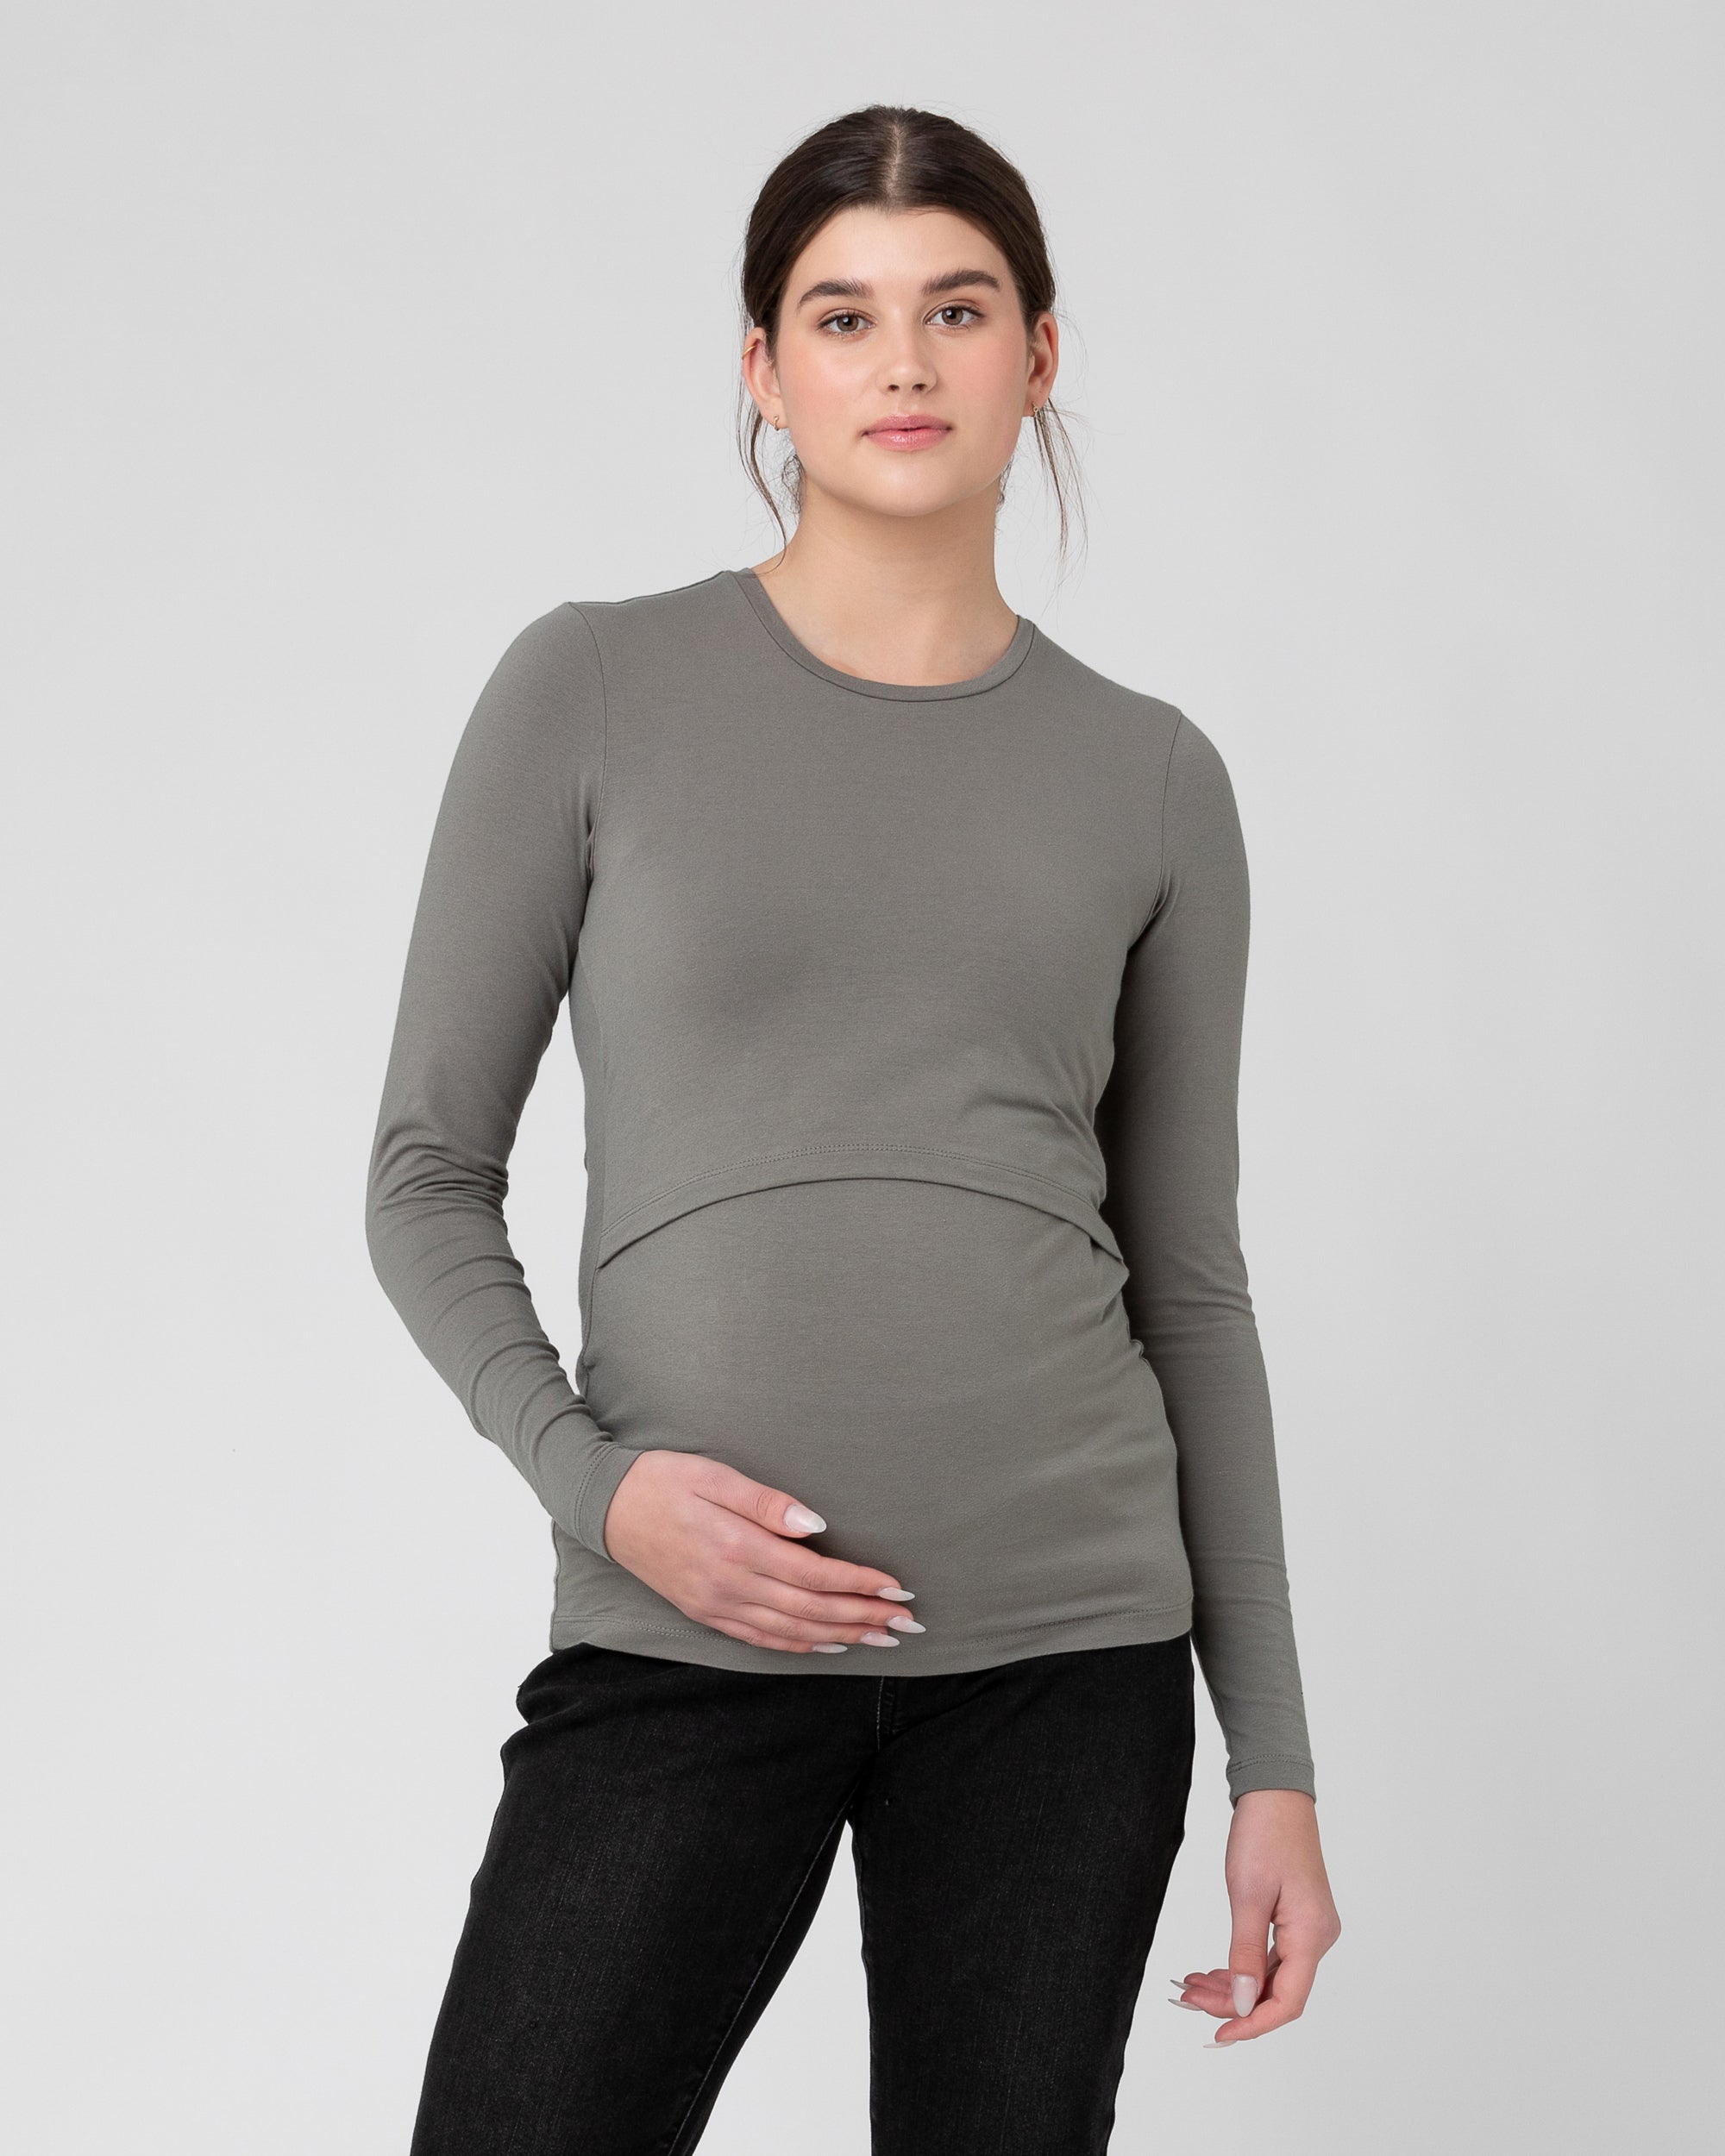 Blue maternity.nursing layered top now on